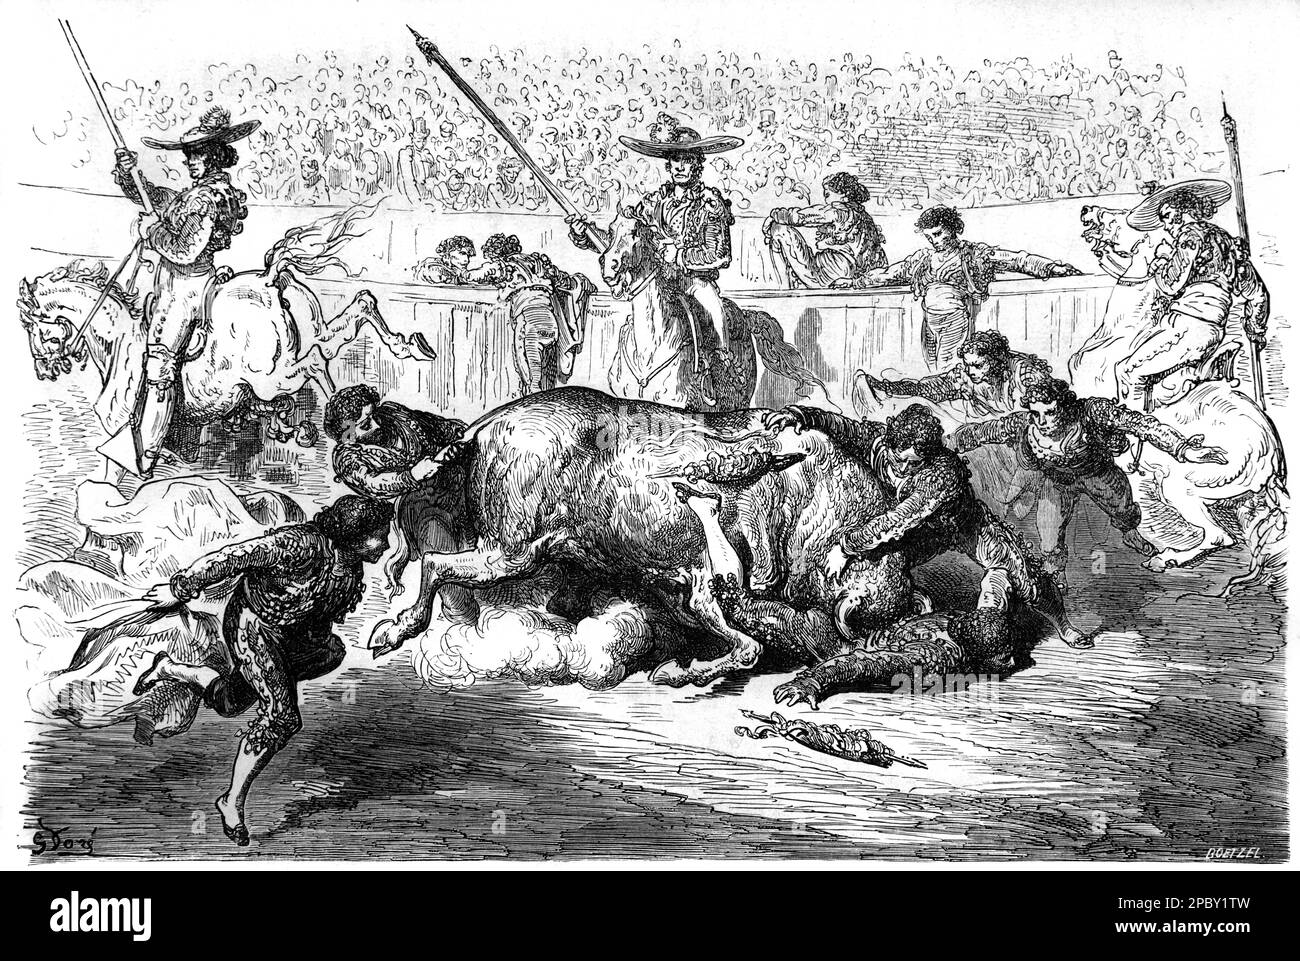 A banderillero in danger during a Spanish Bullfight or Corrida Spain. Vintage or Historic Engraving or Illustration by Gustave Doré 1862 Stock Photo